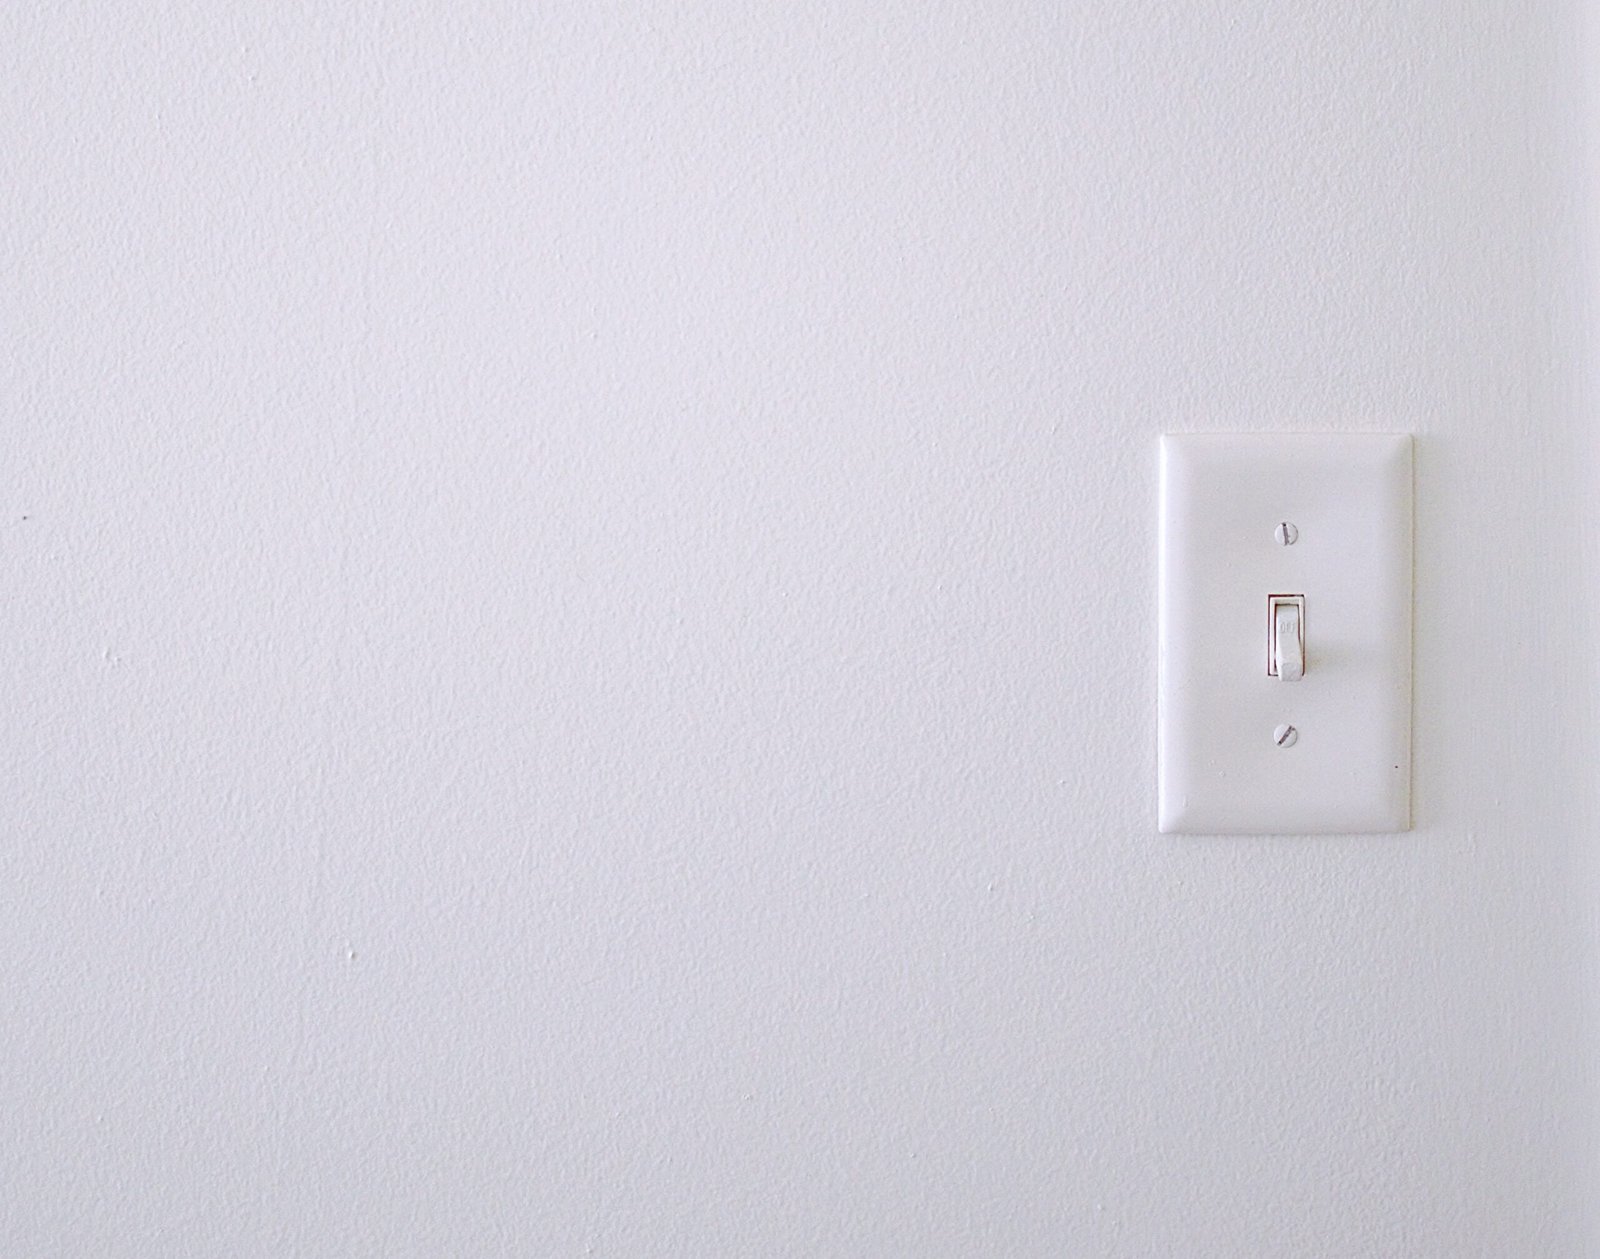 A light switch, one of the commonly used lucid dreaming reality check methods.